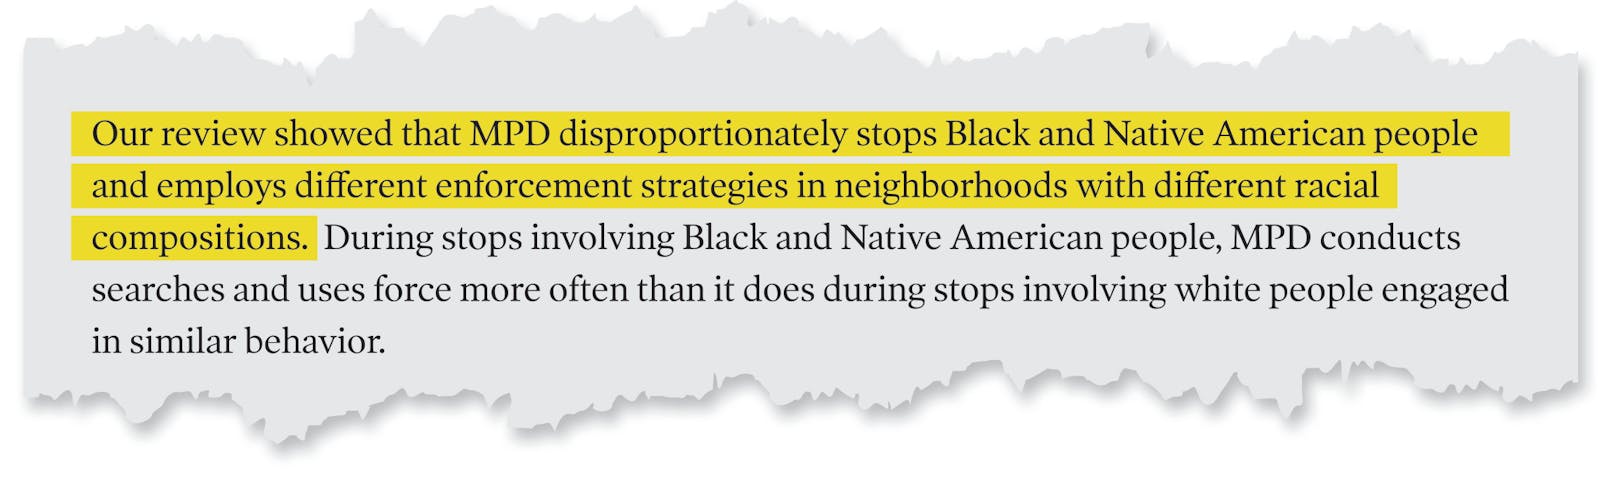 A page tear from the Department of Justice's report that reads: 'Our review showed that MPD disproportionately stops Black and Native American people and employs different enforcement strategies in neighborhoods with different racial compositions. During stops involving Black and Native American people, MPD conducts searches and uses force more often than it does during stops involving white people engaged in similar behavior.'